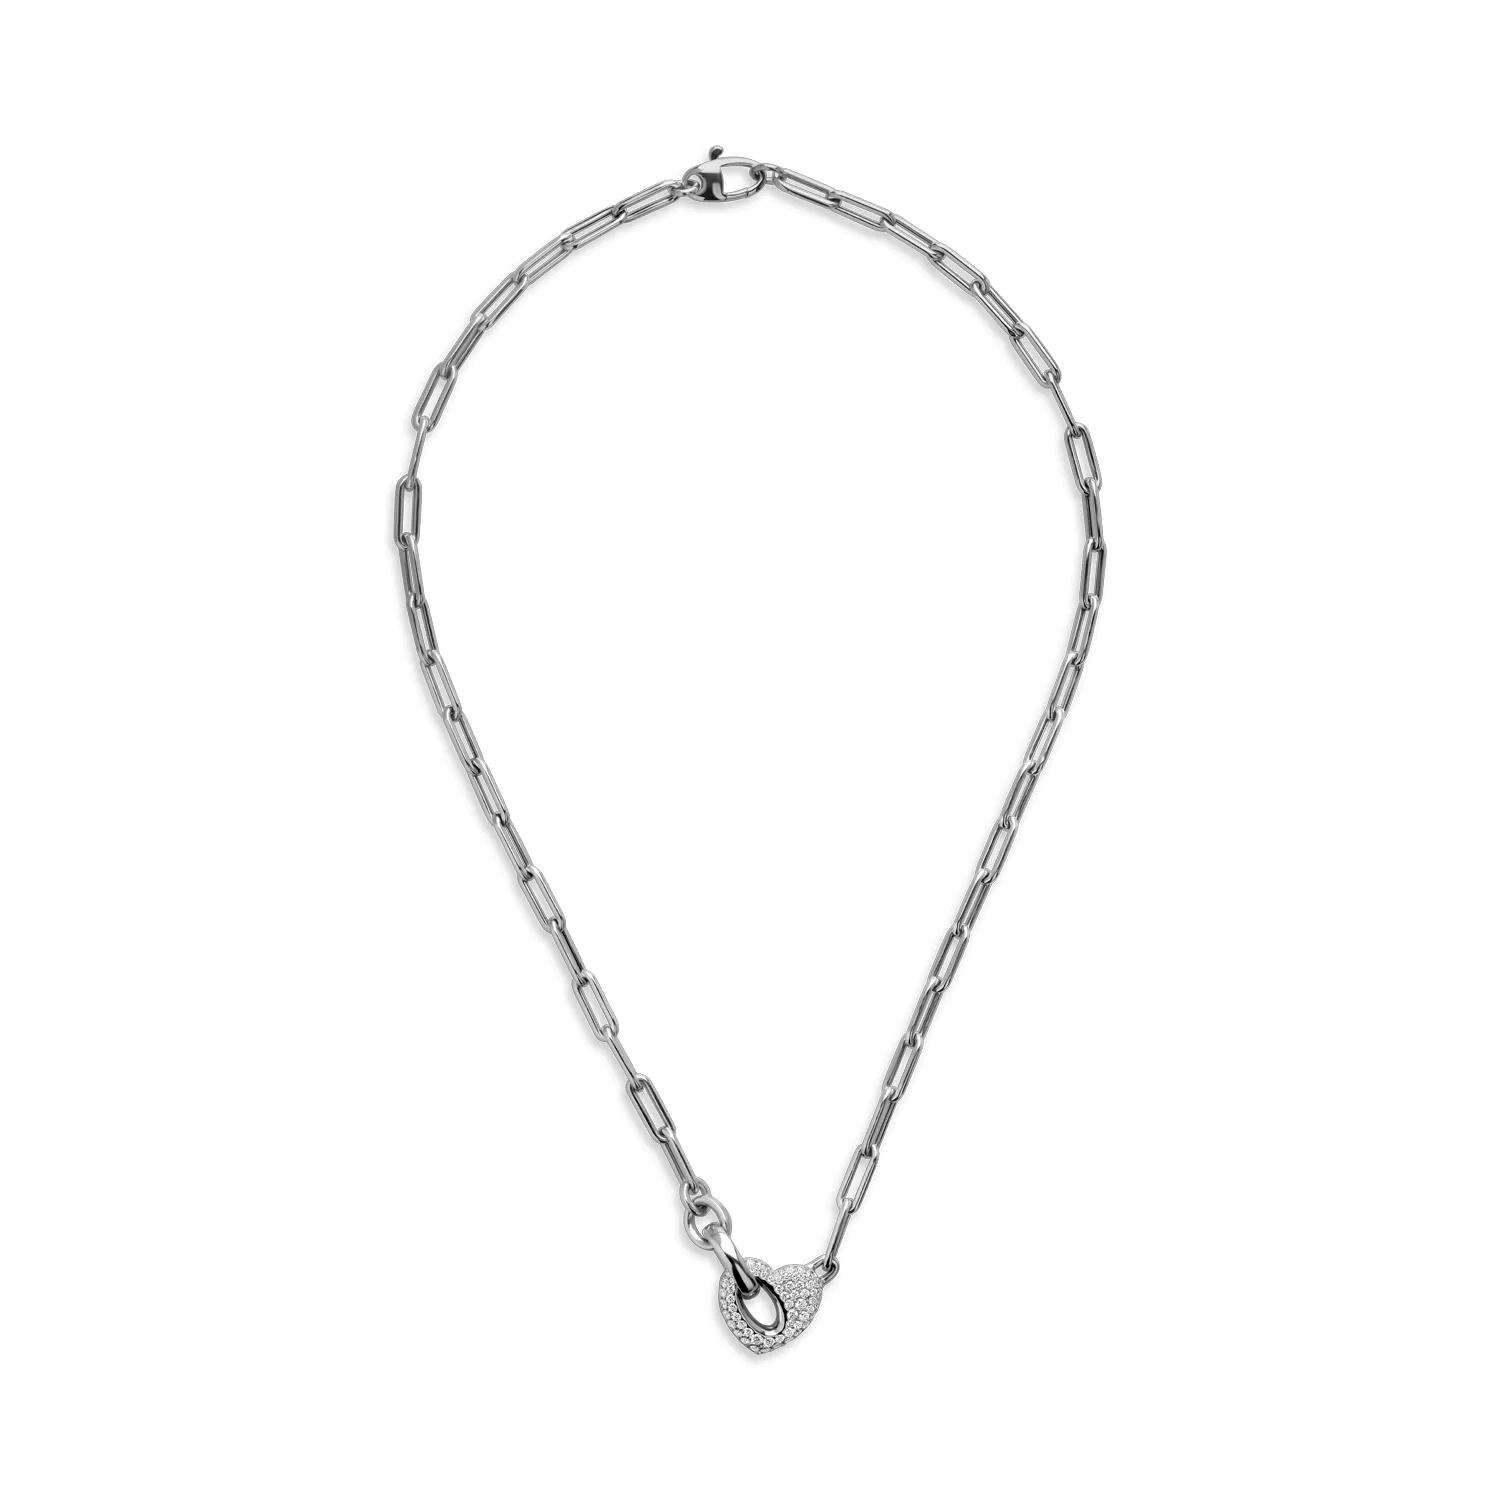 White gold heart pendant necklace with 0.82ct diamonds